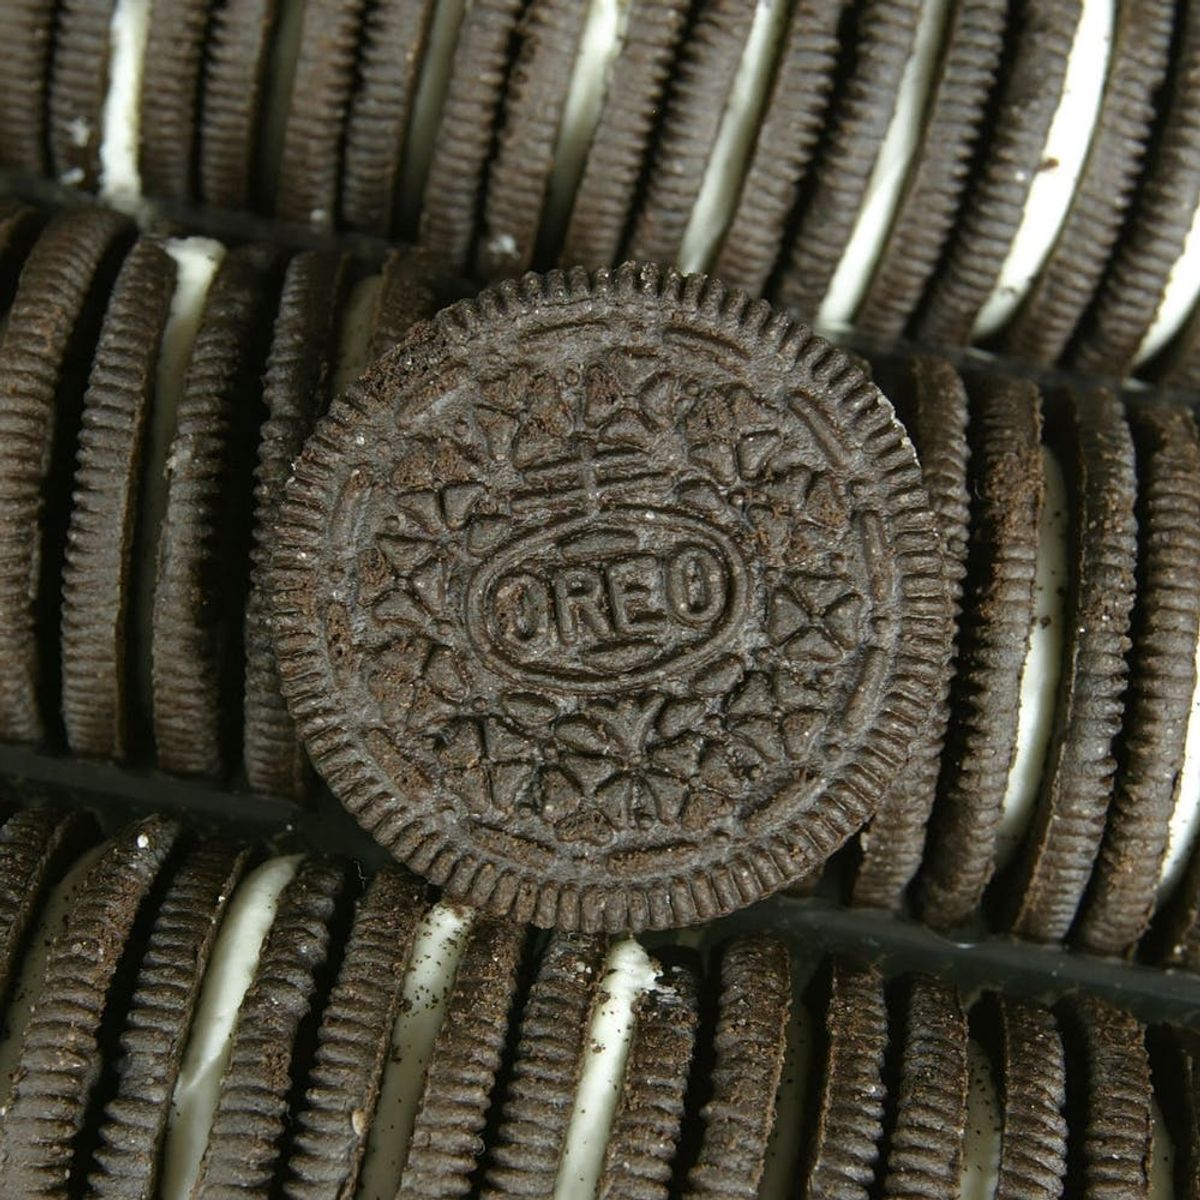 Oreo’s Newest Flavor Additions May Be… Spicy?